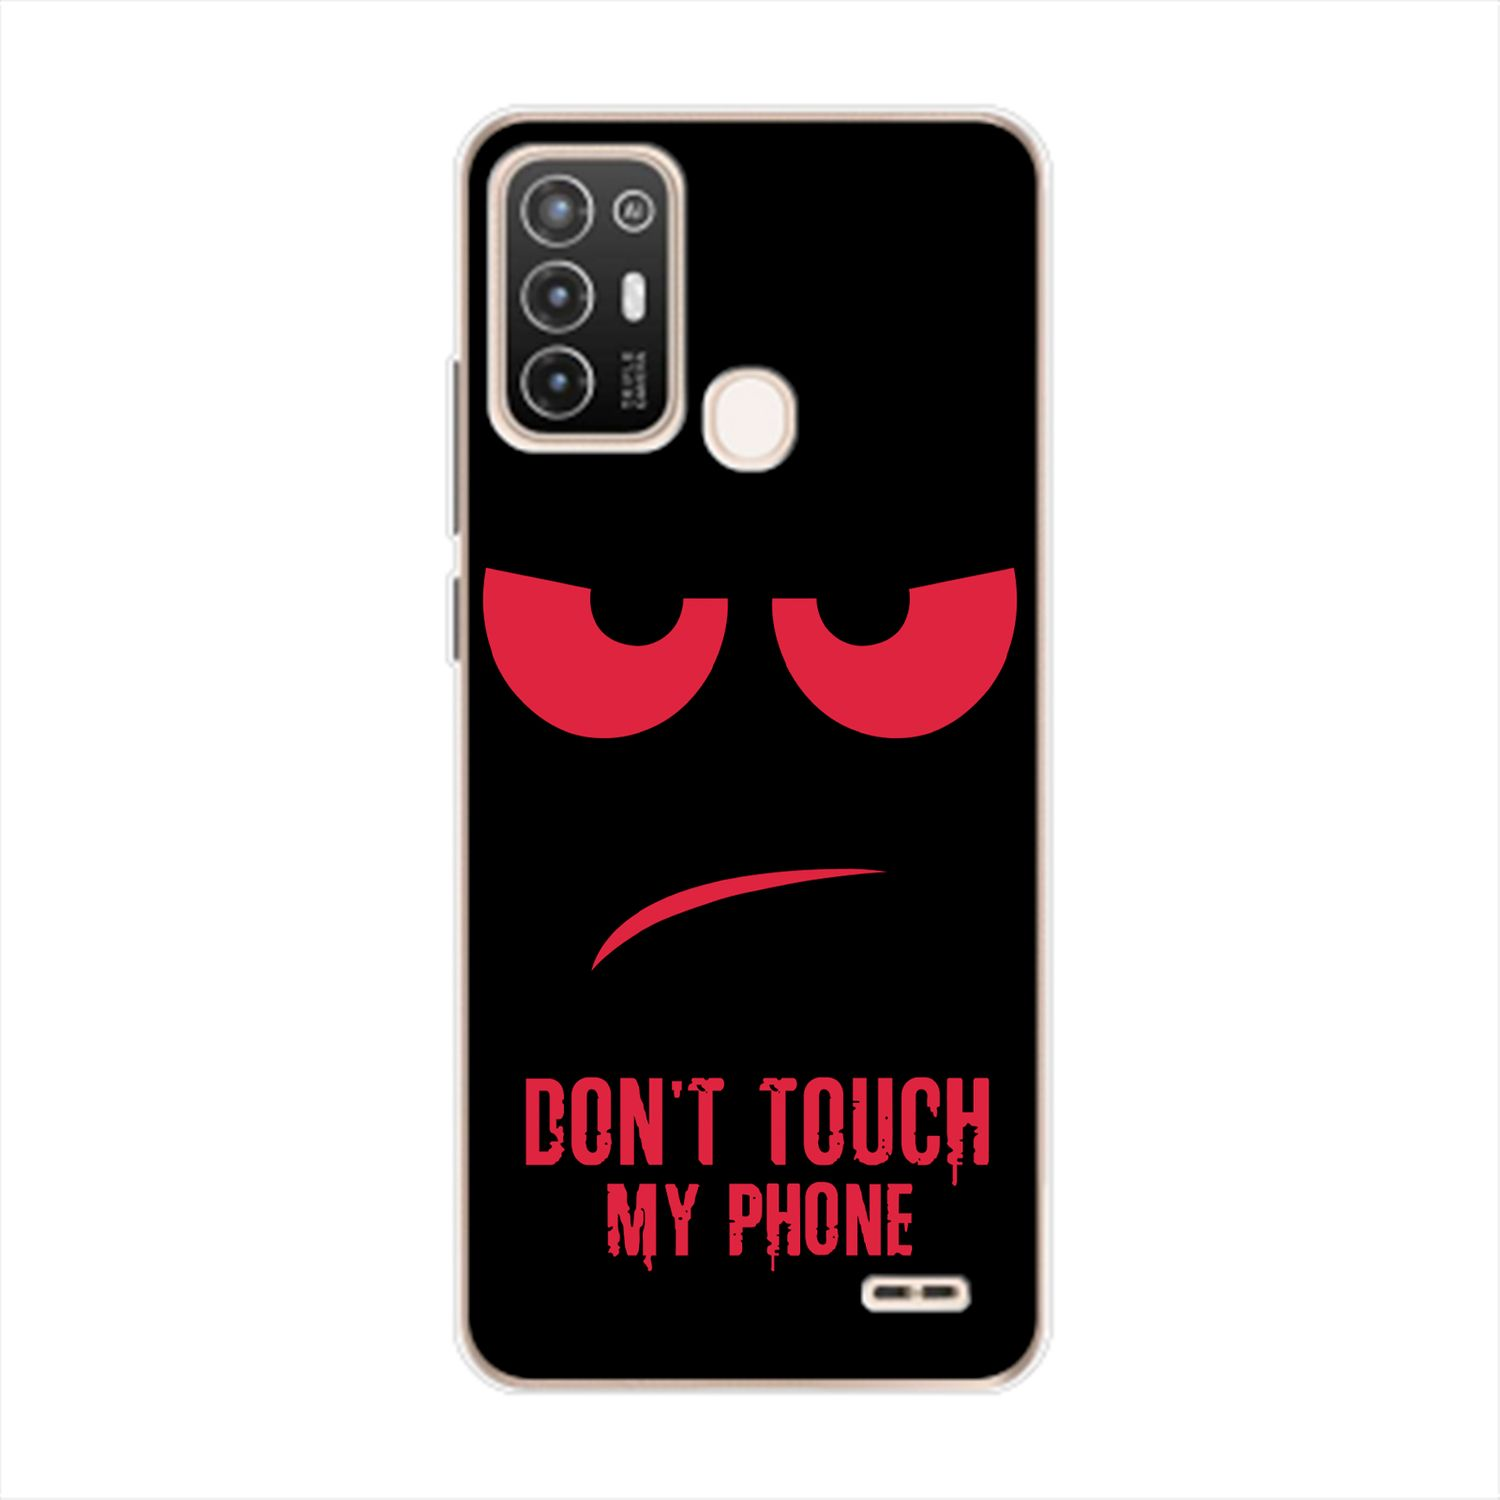 KÖNIG Touch Rot DESIGN Case, ZTE, A52, Blade Backcover, Dont Phone My